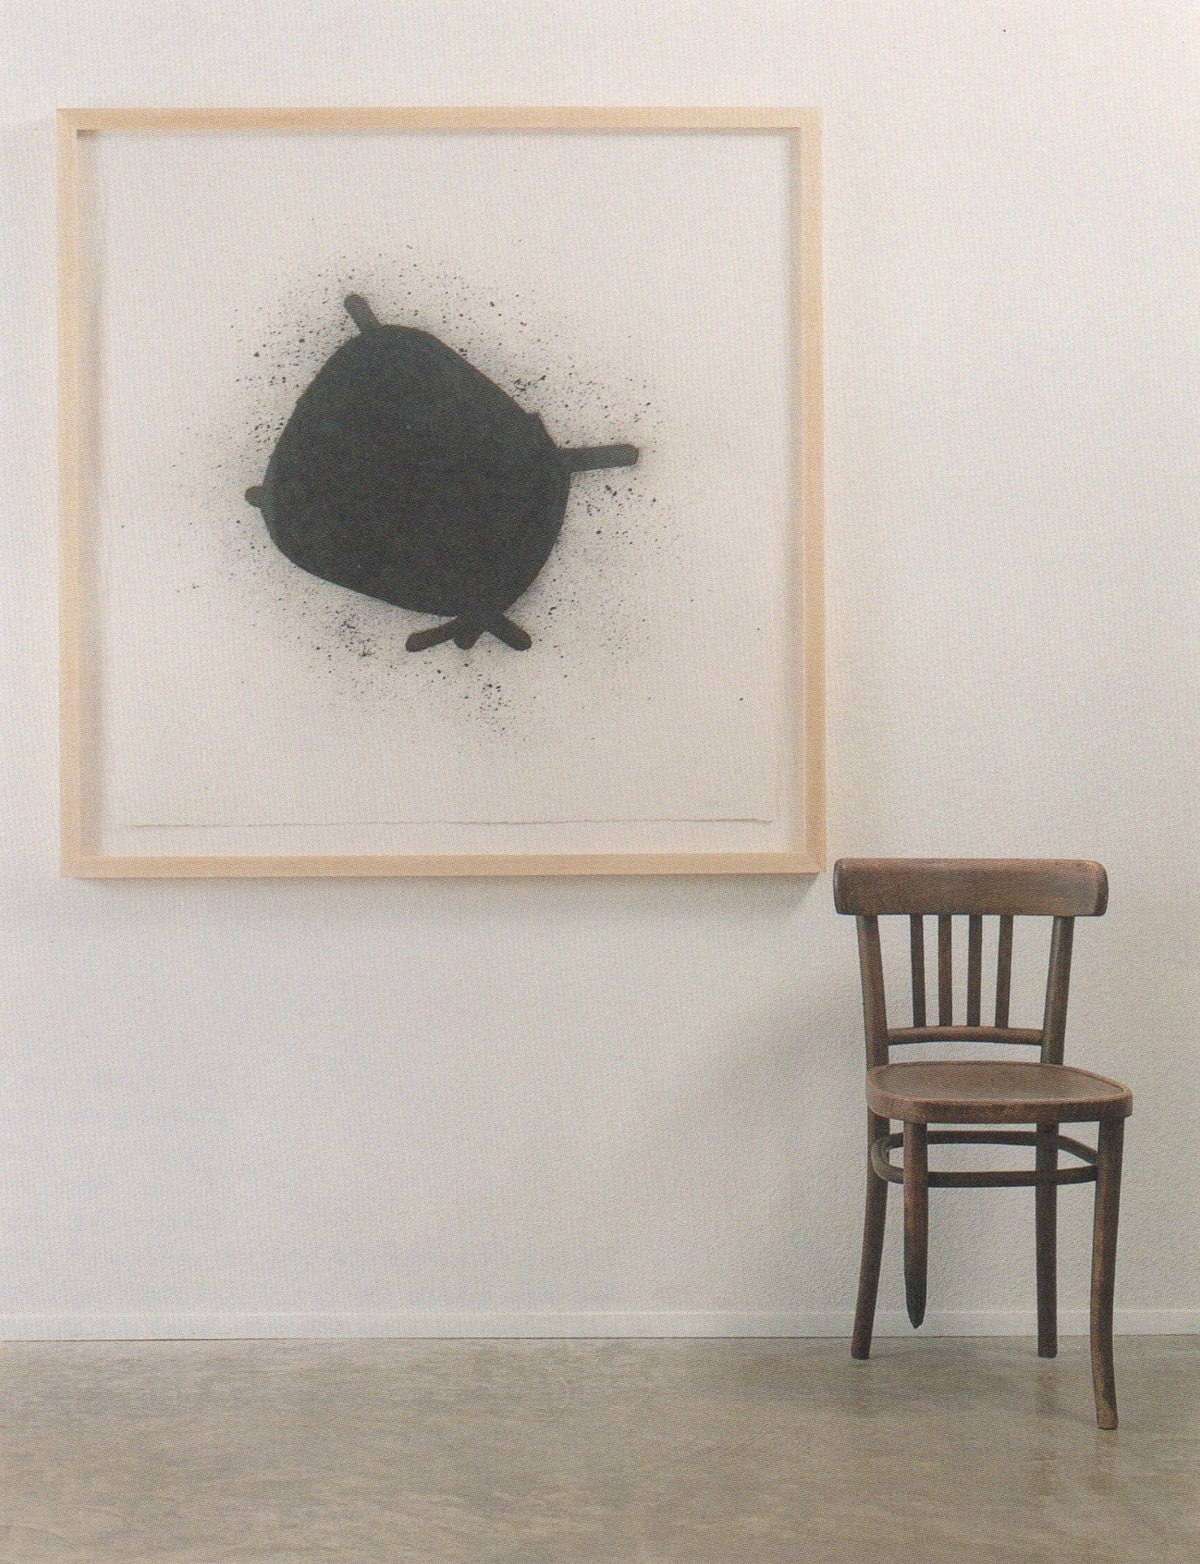 eric snell, “untitled” (1991), ash of chair on paper, 102 x 102 cm